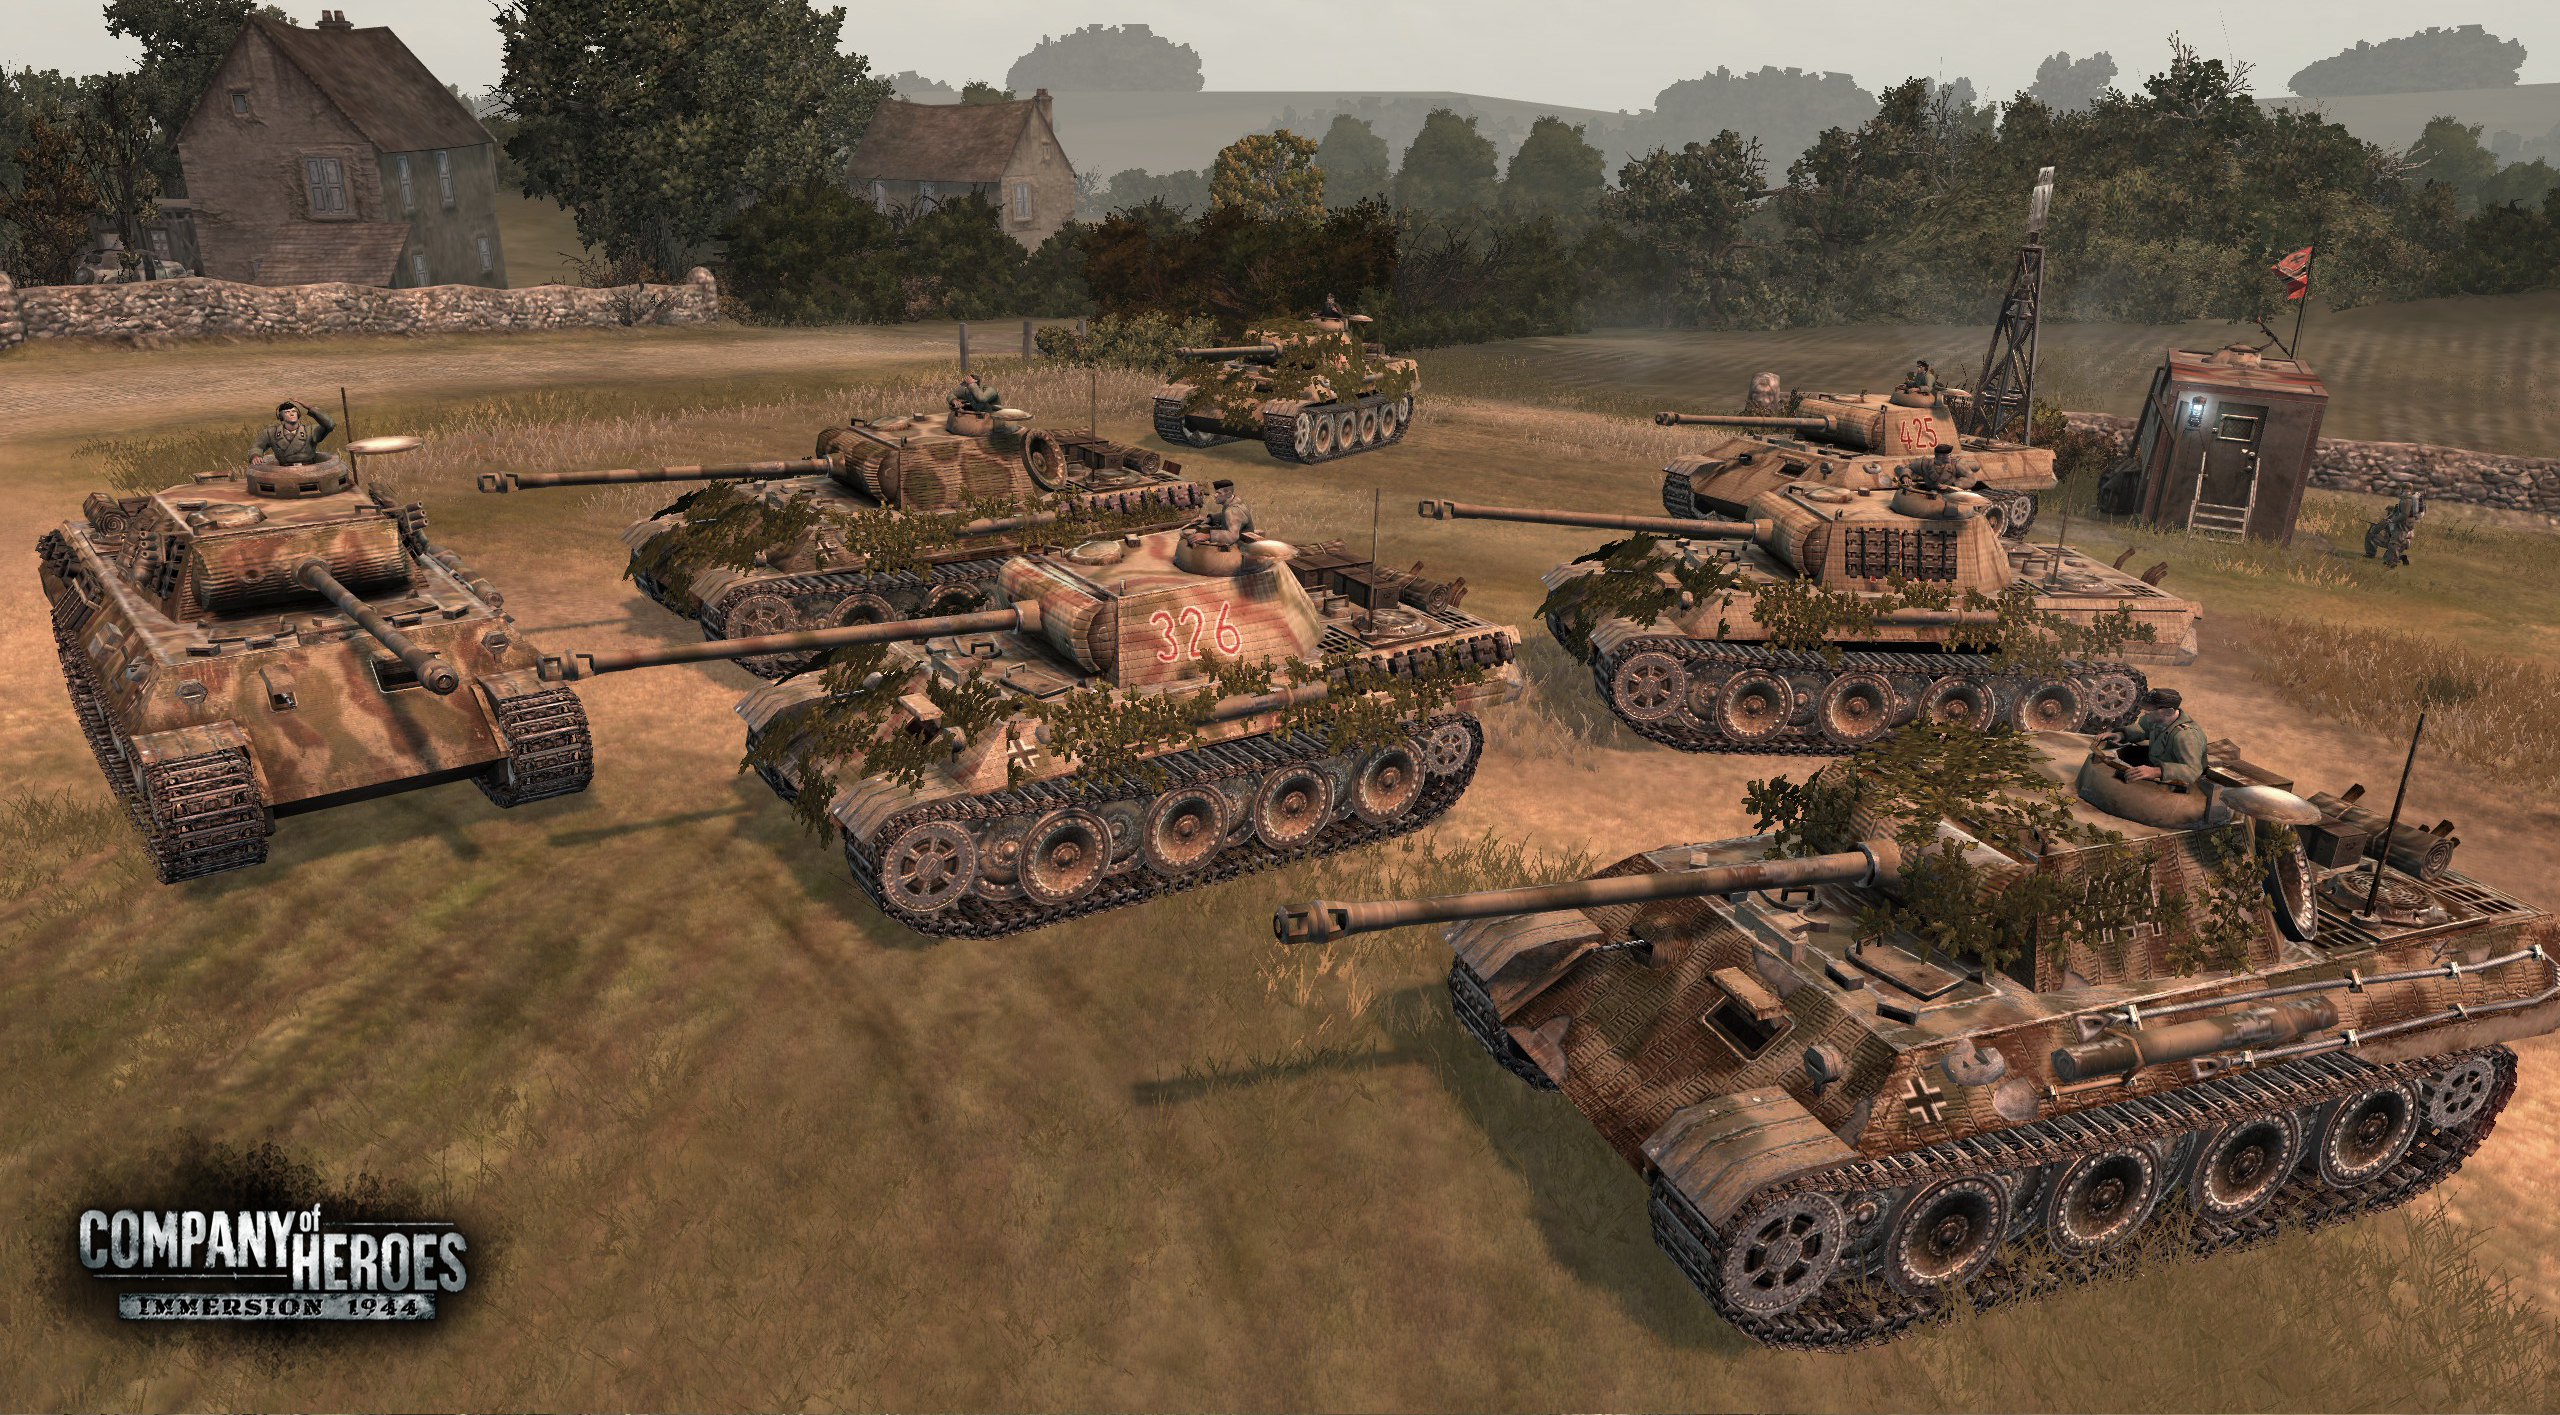 Tank combat mod. Company of Heroes: Immersion 1944. Company of Heroes 1. Company of Heroes Immersion 1944 Mod. COH 1944.